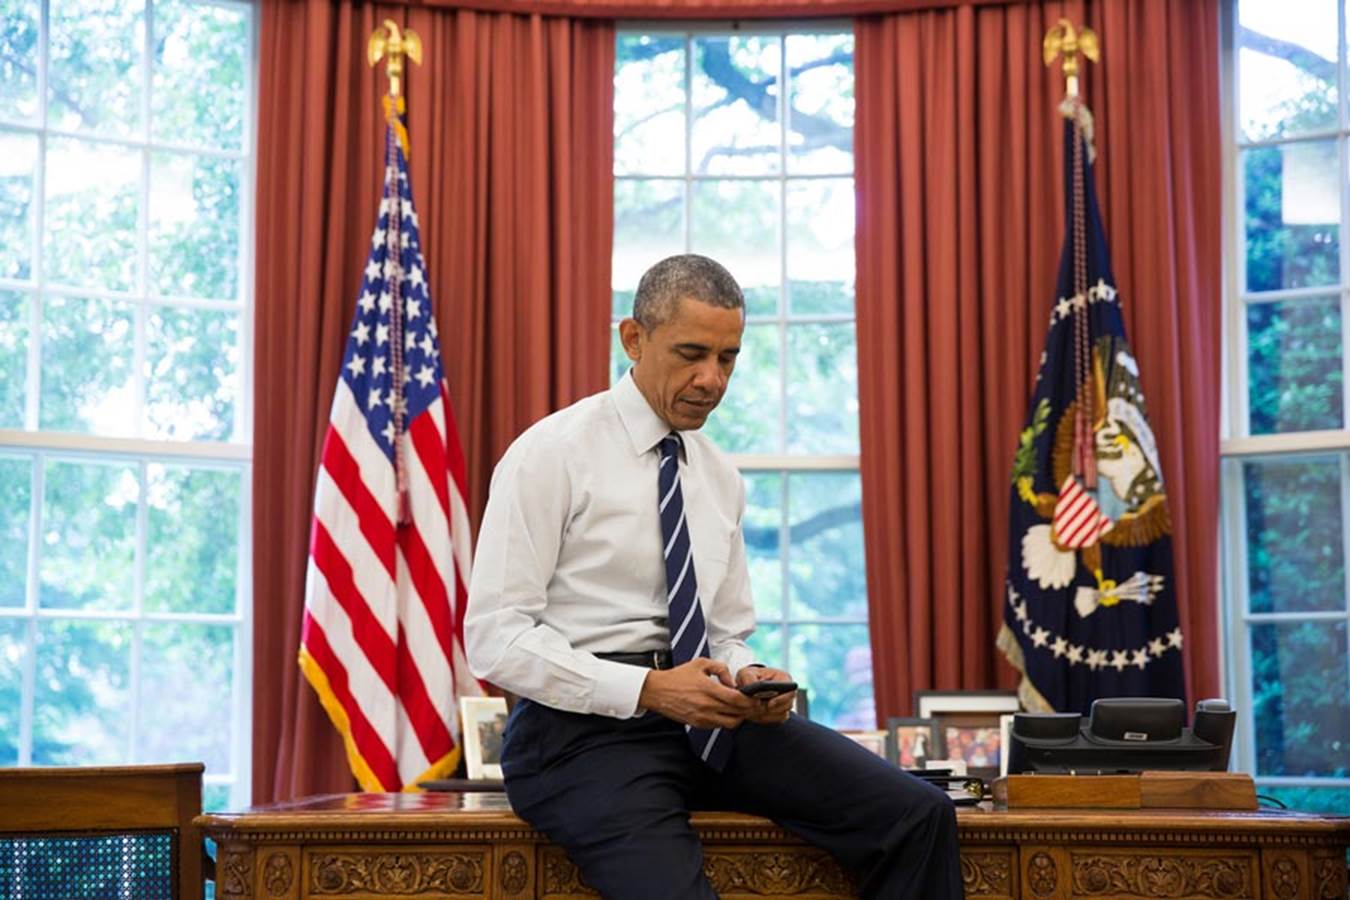 President Obama on his iPhone